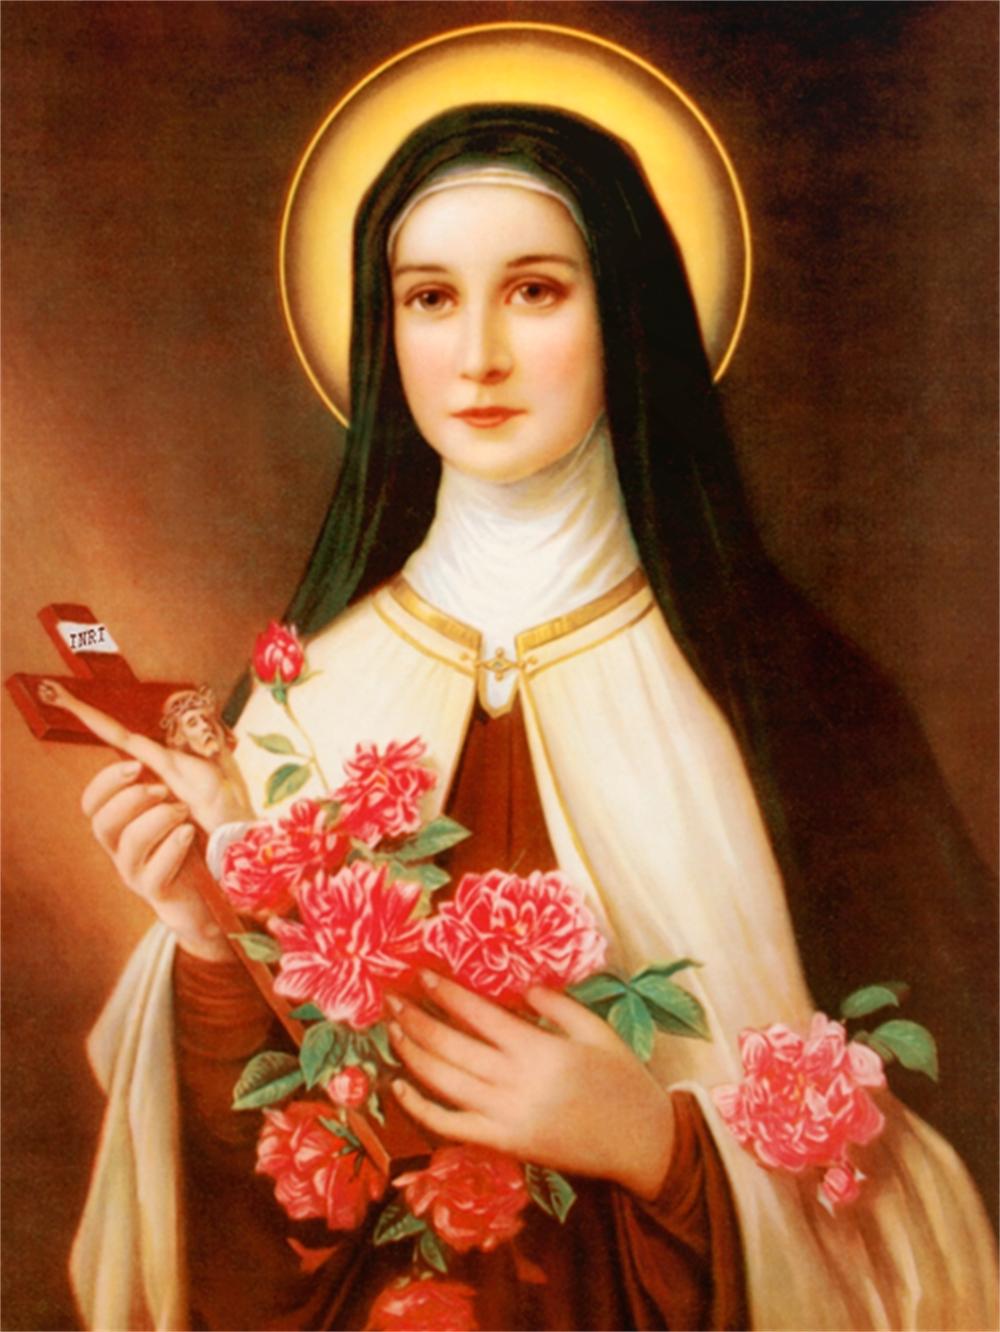 St. Therese of Lisieux, pray for us! Her Feast day is on October 1.